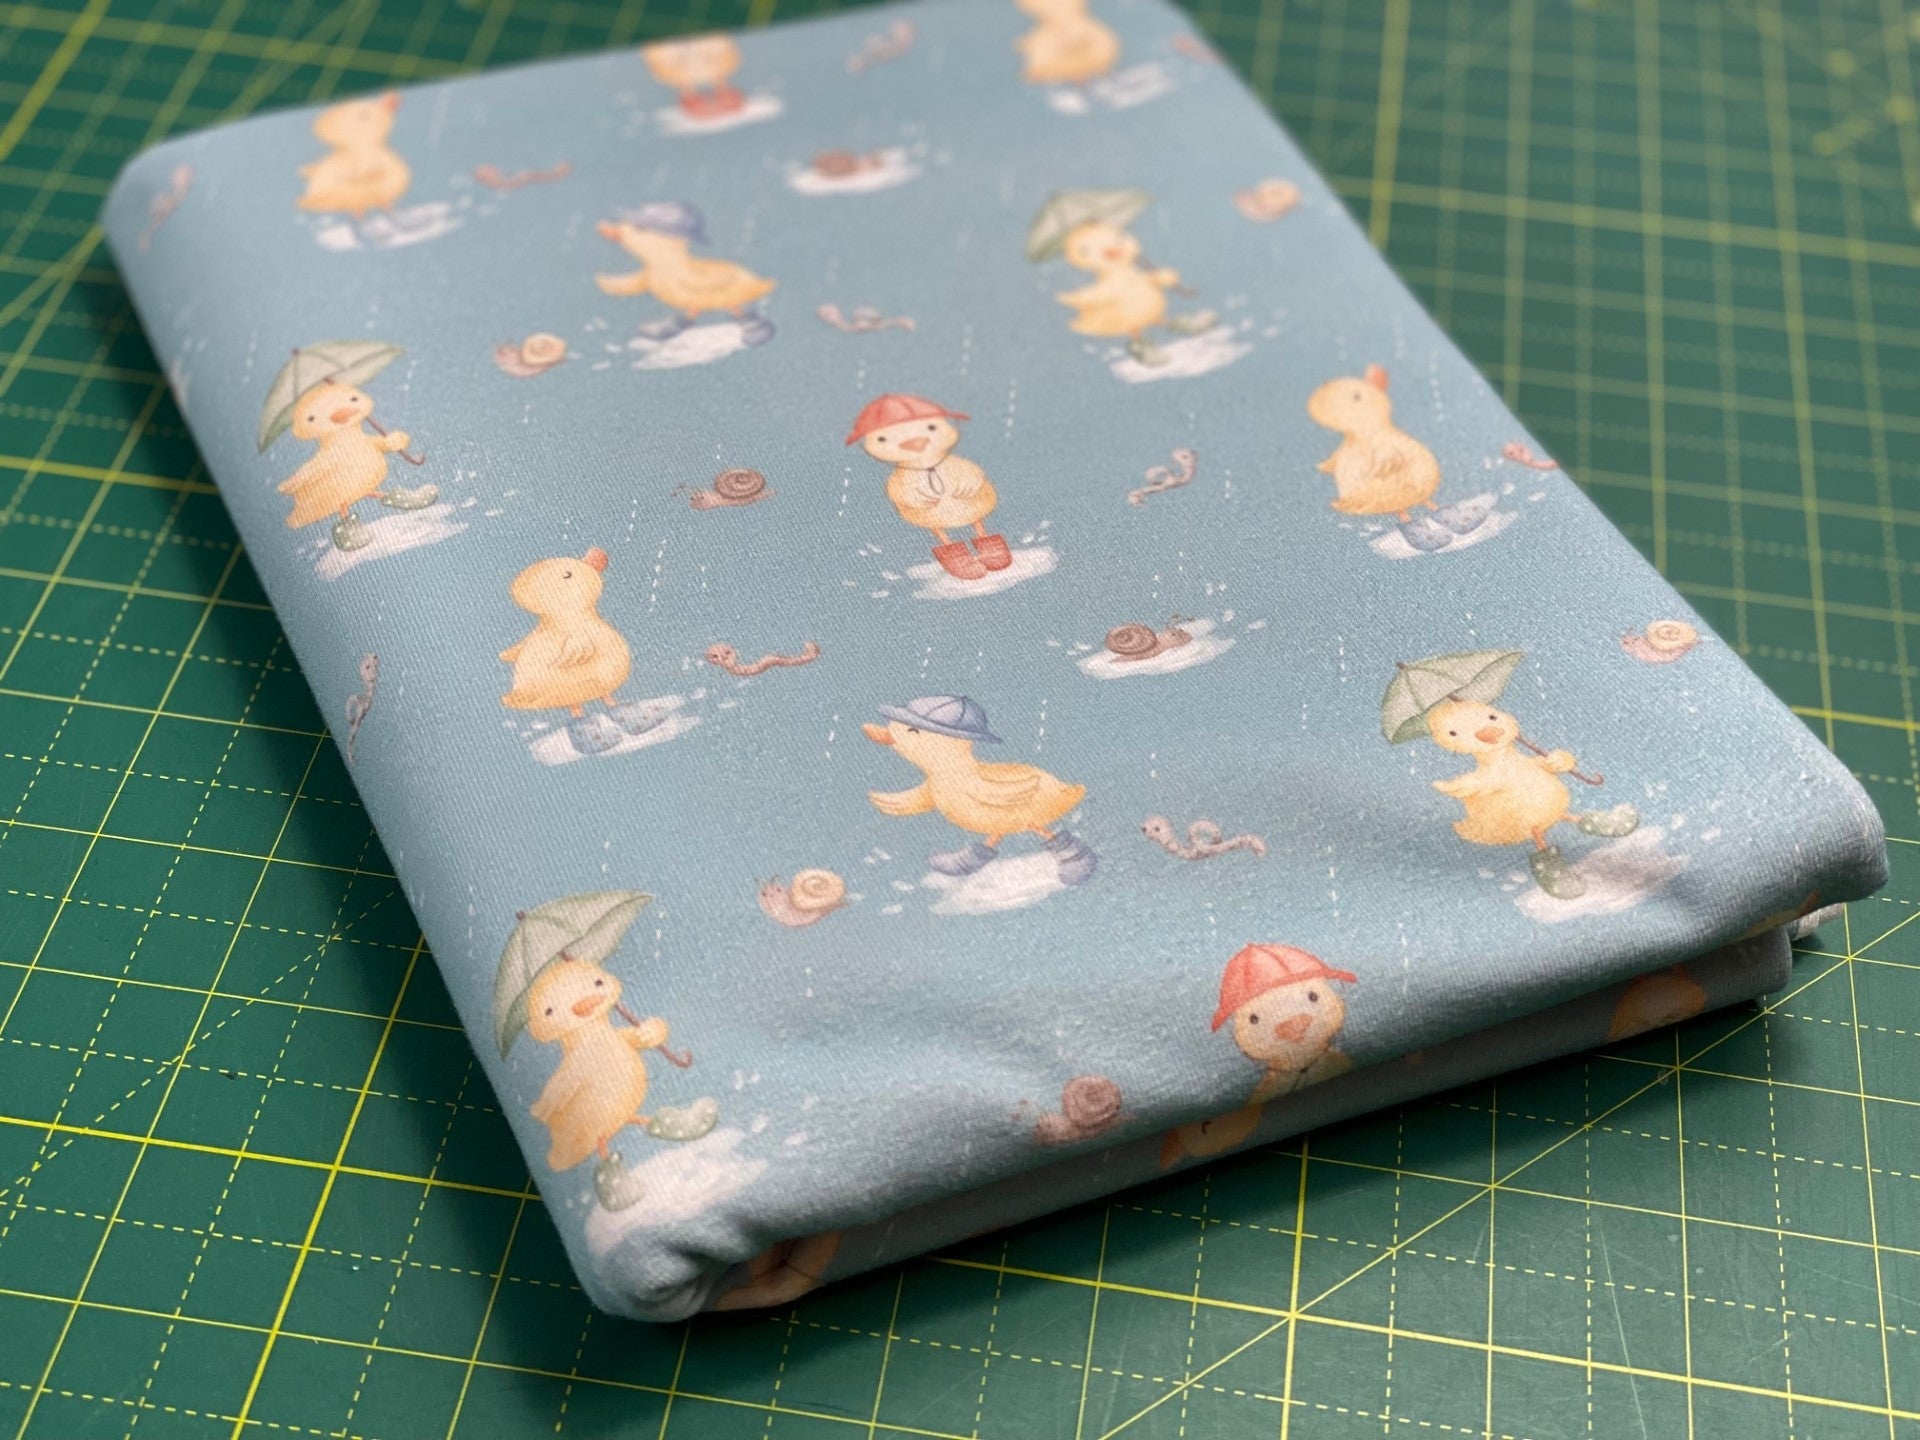 In Stock: Family Fabrics - Autumn River Studio - Rain Ducks - 220 gsm Jersey - By the 1/2 yd - Little Rhody Sewing Co.